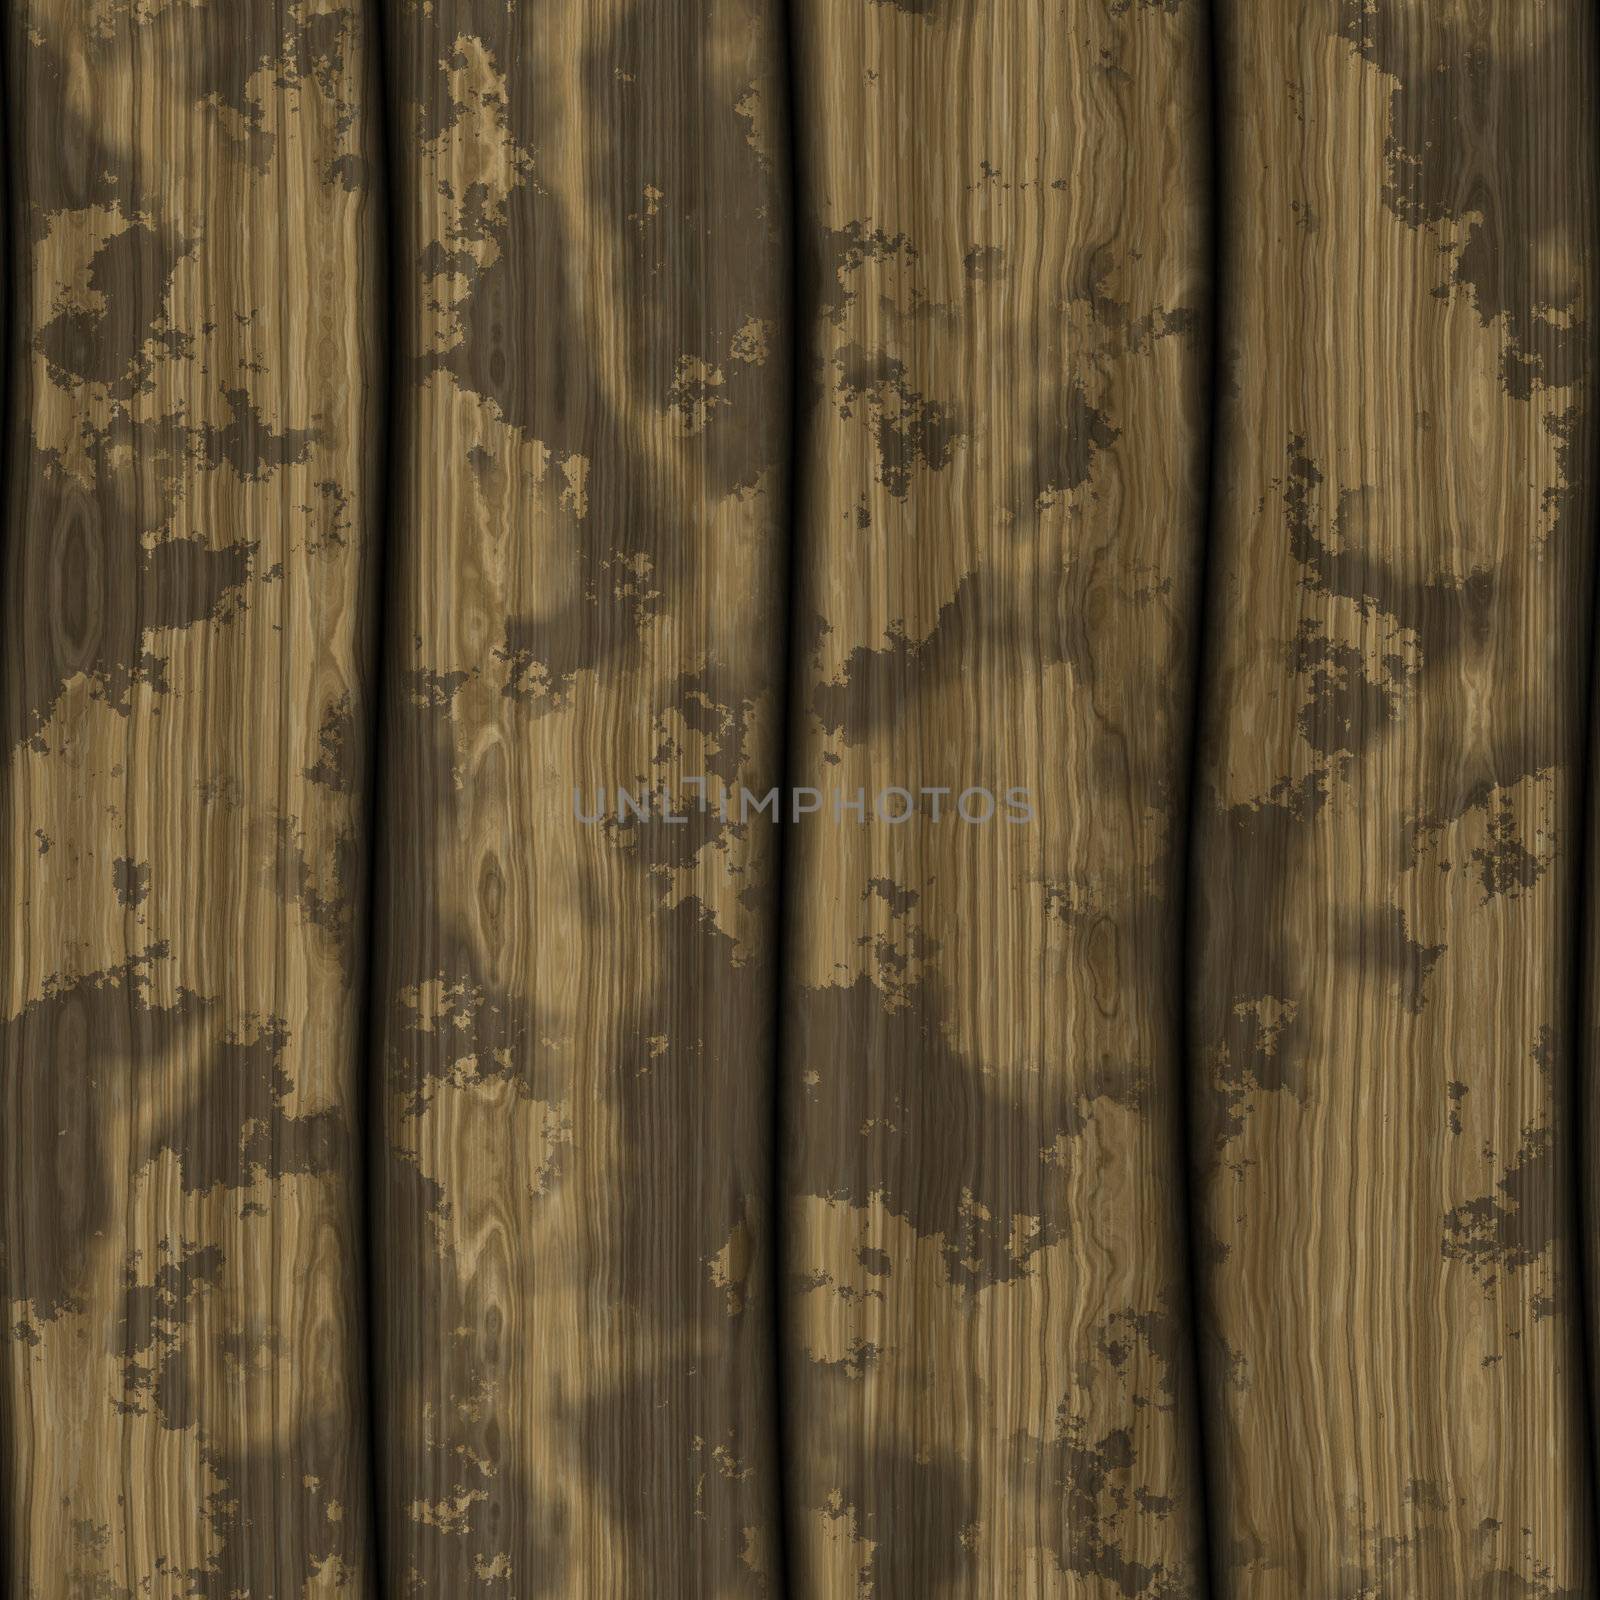 Seamless tale of 4 stained wooden planks